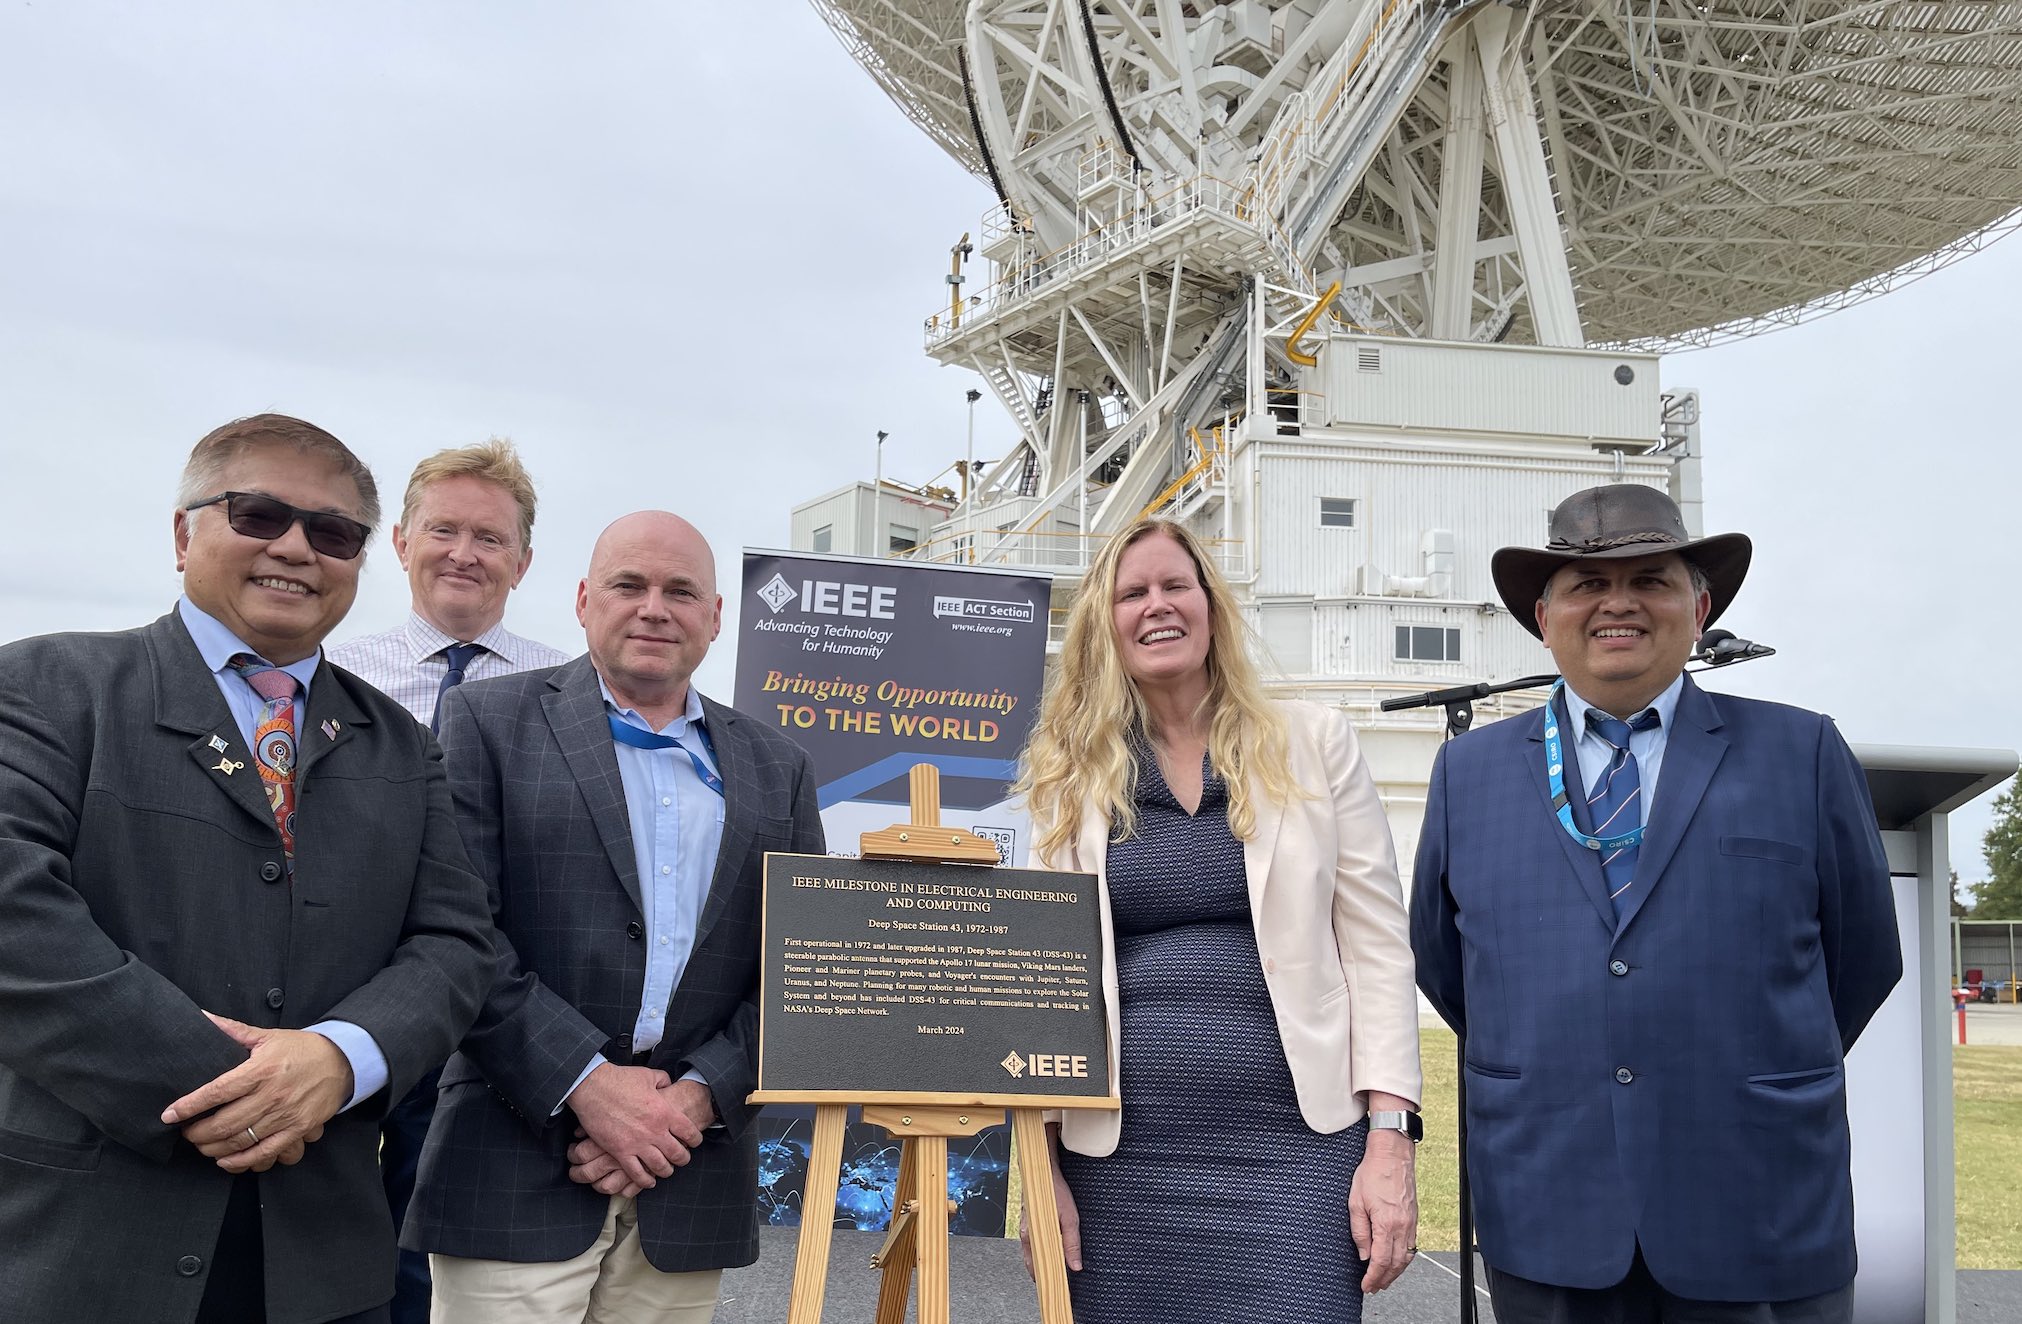 A group of people around the IEEE plaque, with the Tidbinbilla 70m antenna in the background.